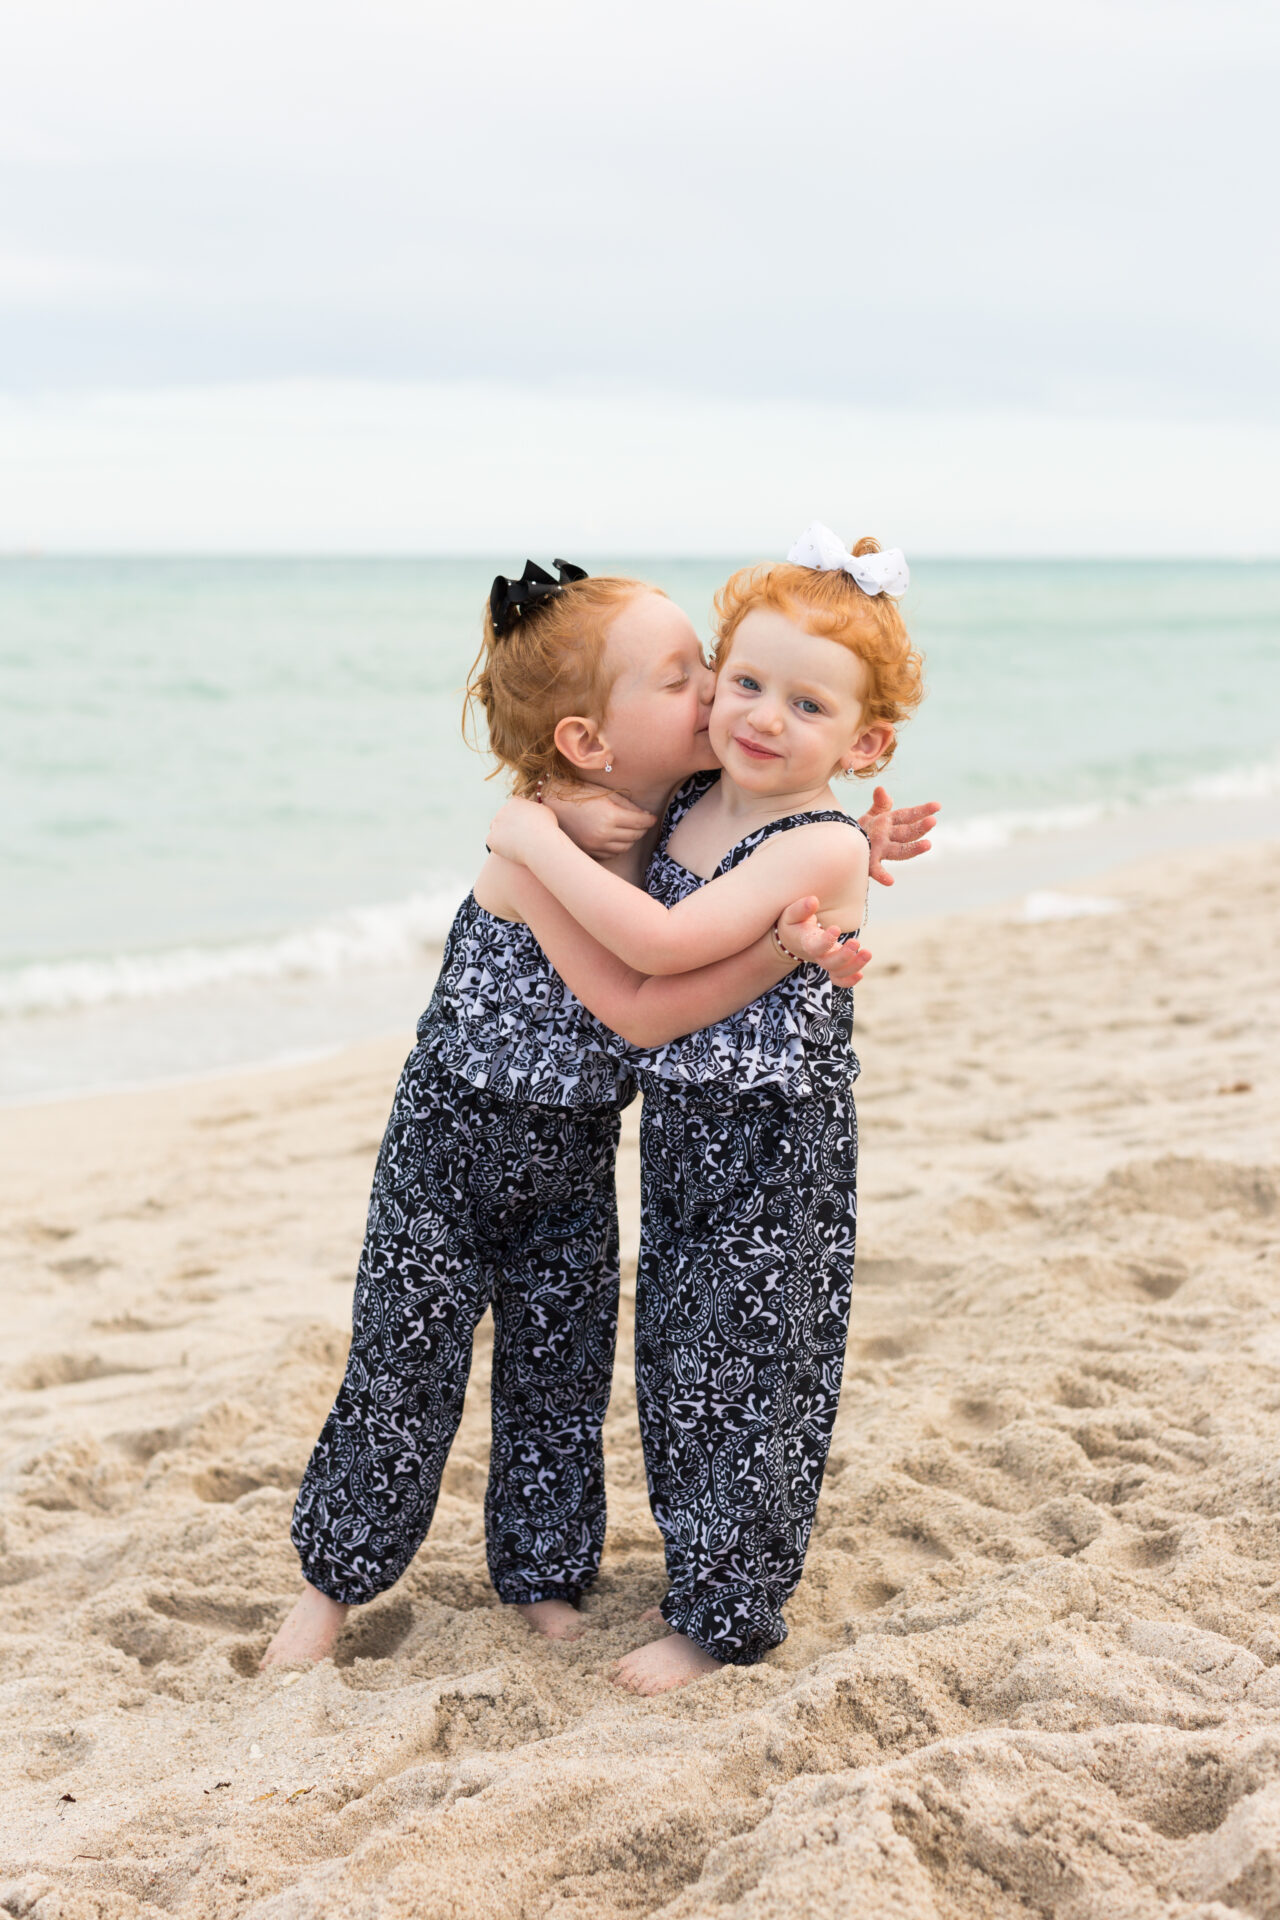 Red Headed Twins Miami Beach Photo Shoot before sunset